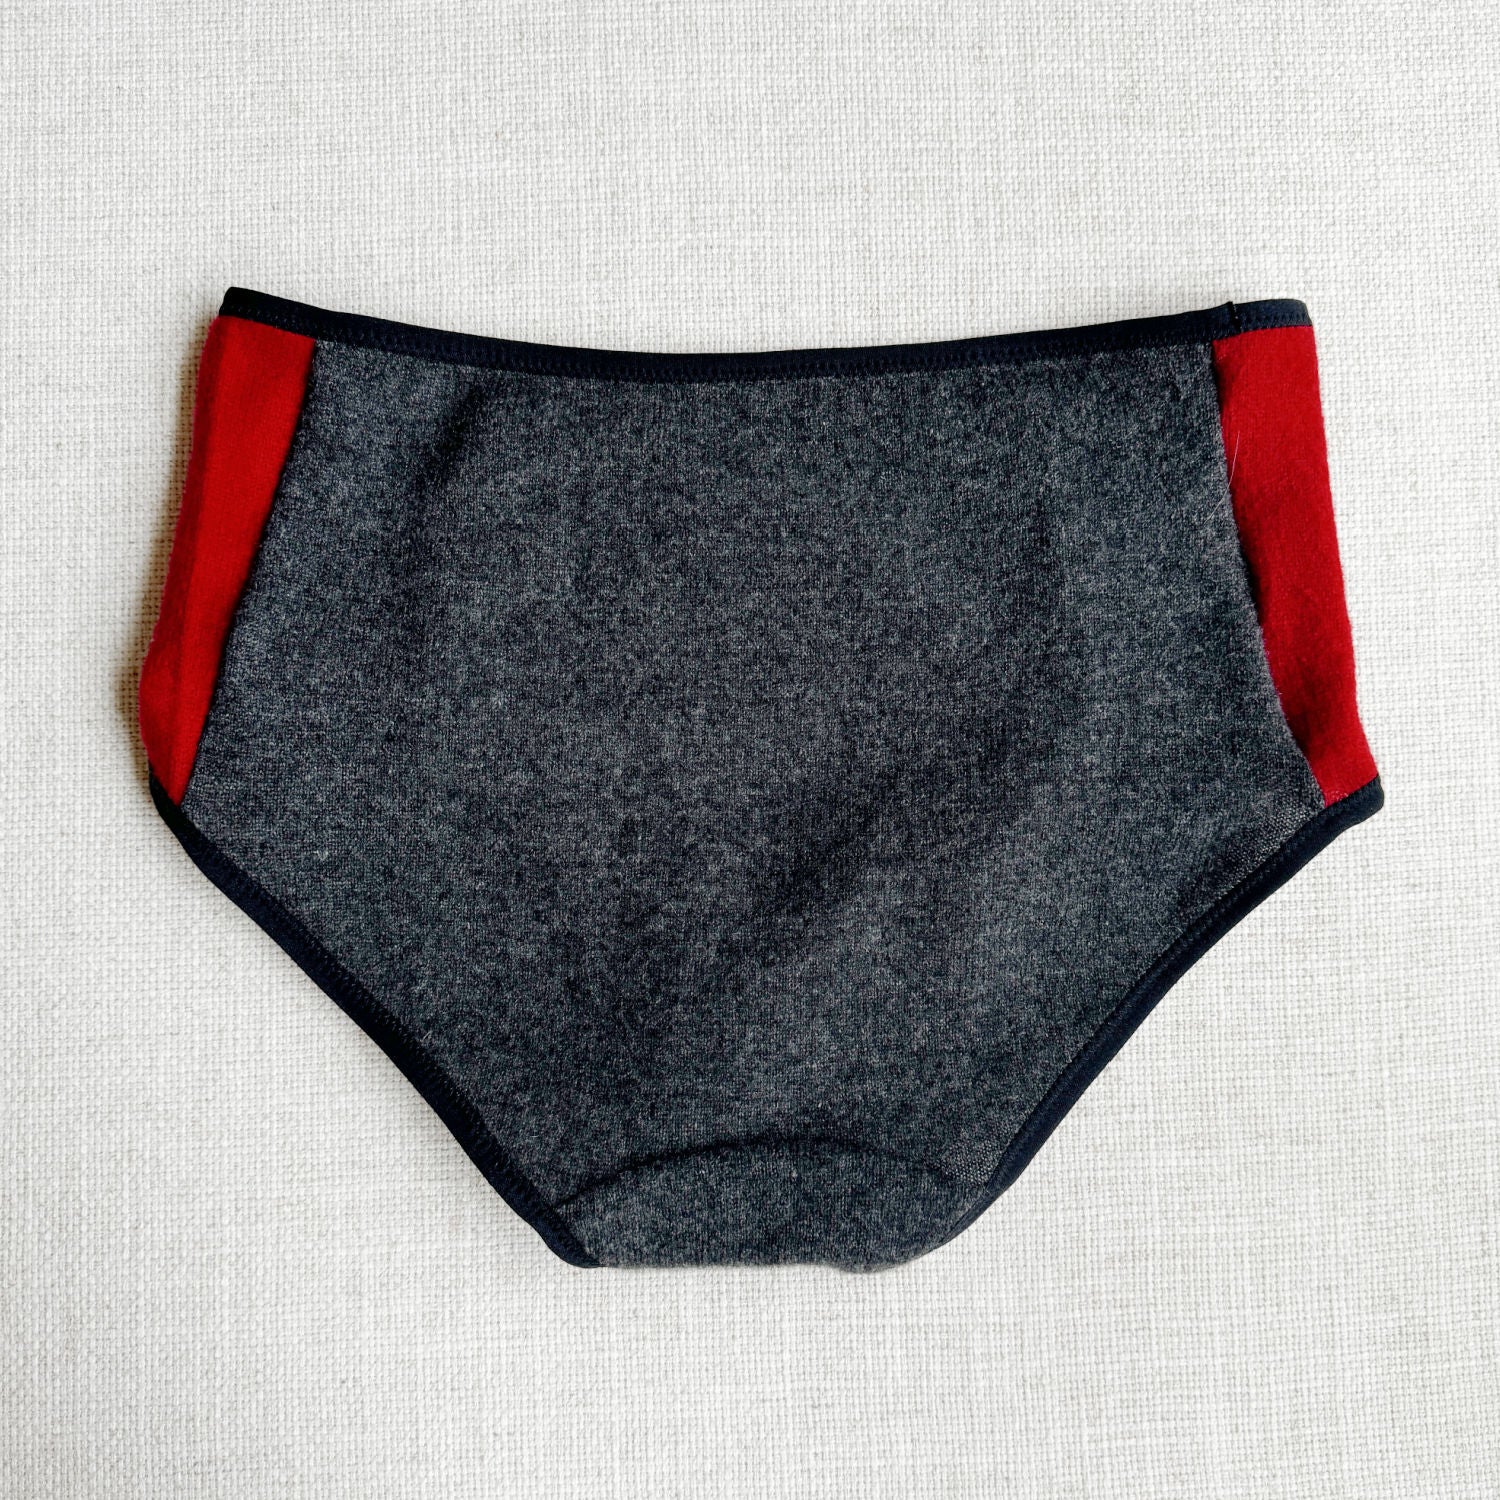 Shop made in Canada grey red cashmere underwear  made in Canada Cashmere underwear for women